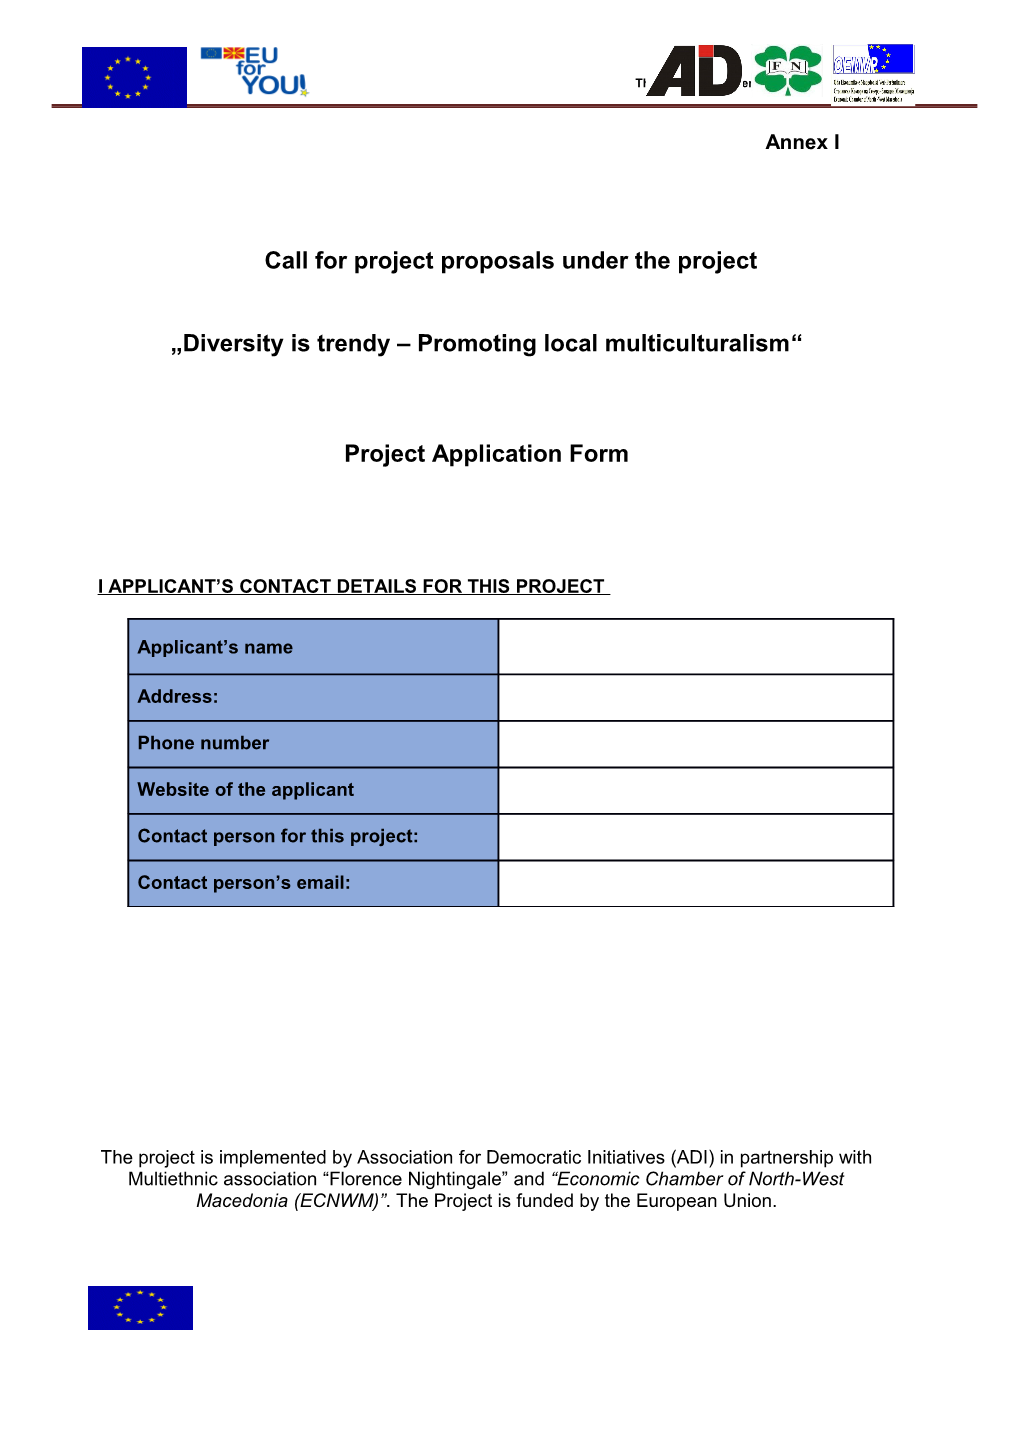 Call for Project Proposals Under the Project